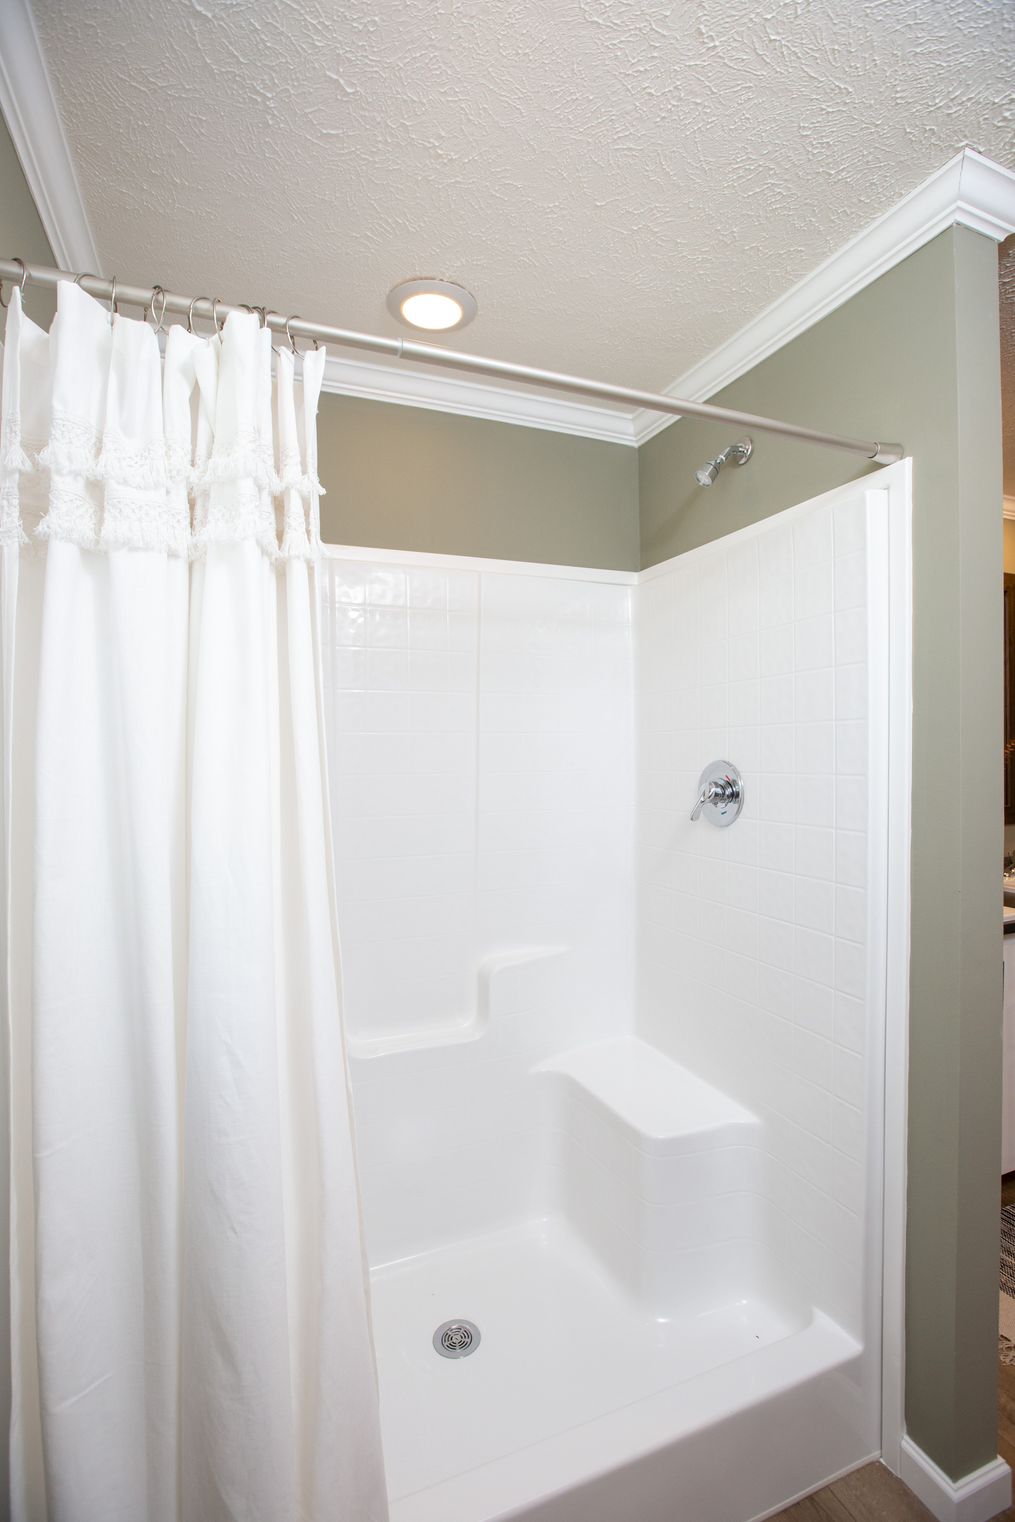 The KEENELAND Master Bathroom. This Manufactured Mobile Home features 3 bedrooms and 2 baths.